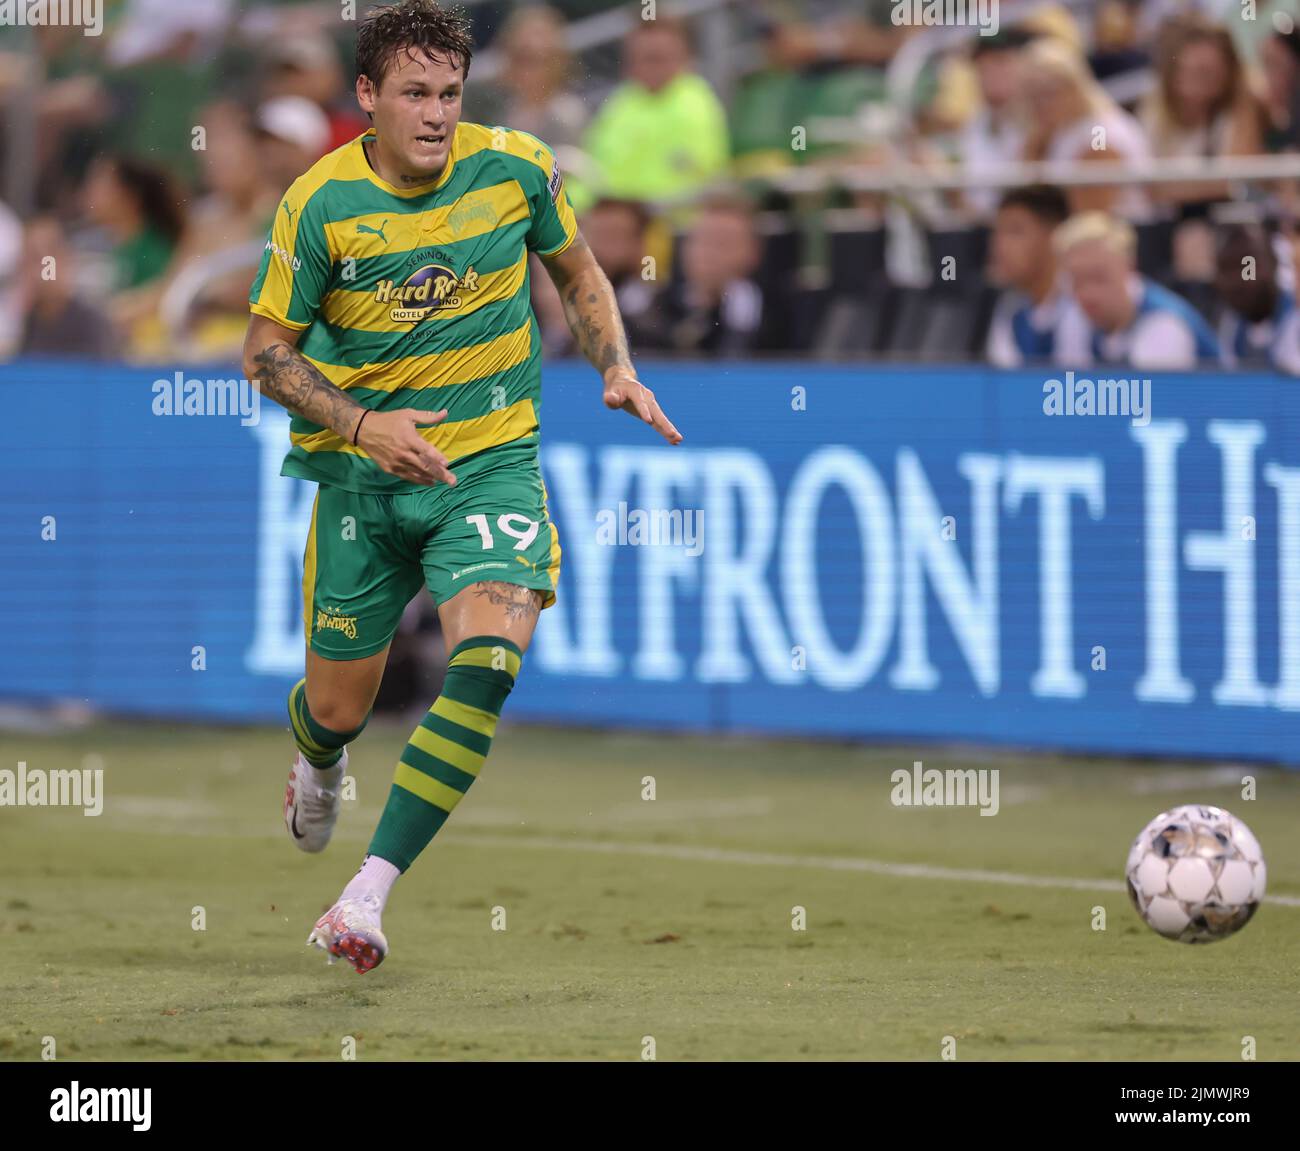 St. Petersburg, FL: Tampa Bay Rowdies forward Jake LaCava (19) on a break away up the pitch during a USL soccer game against Detroit City, Saturday, A Stock Photo